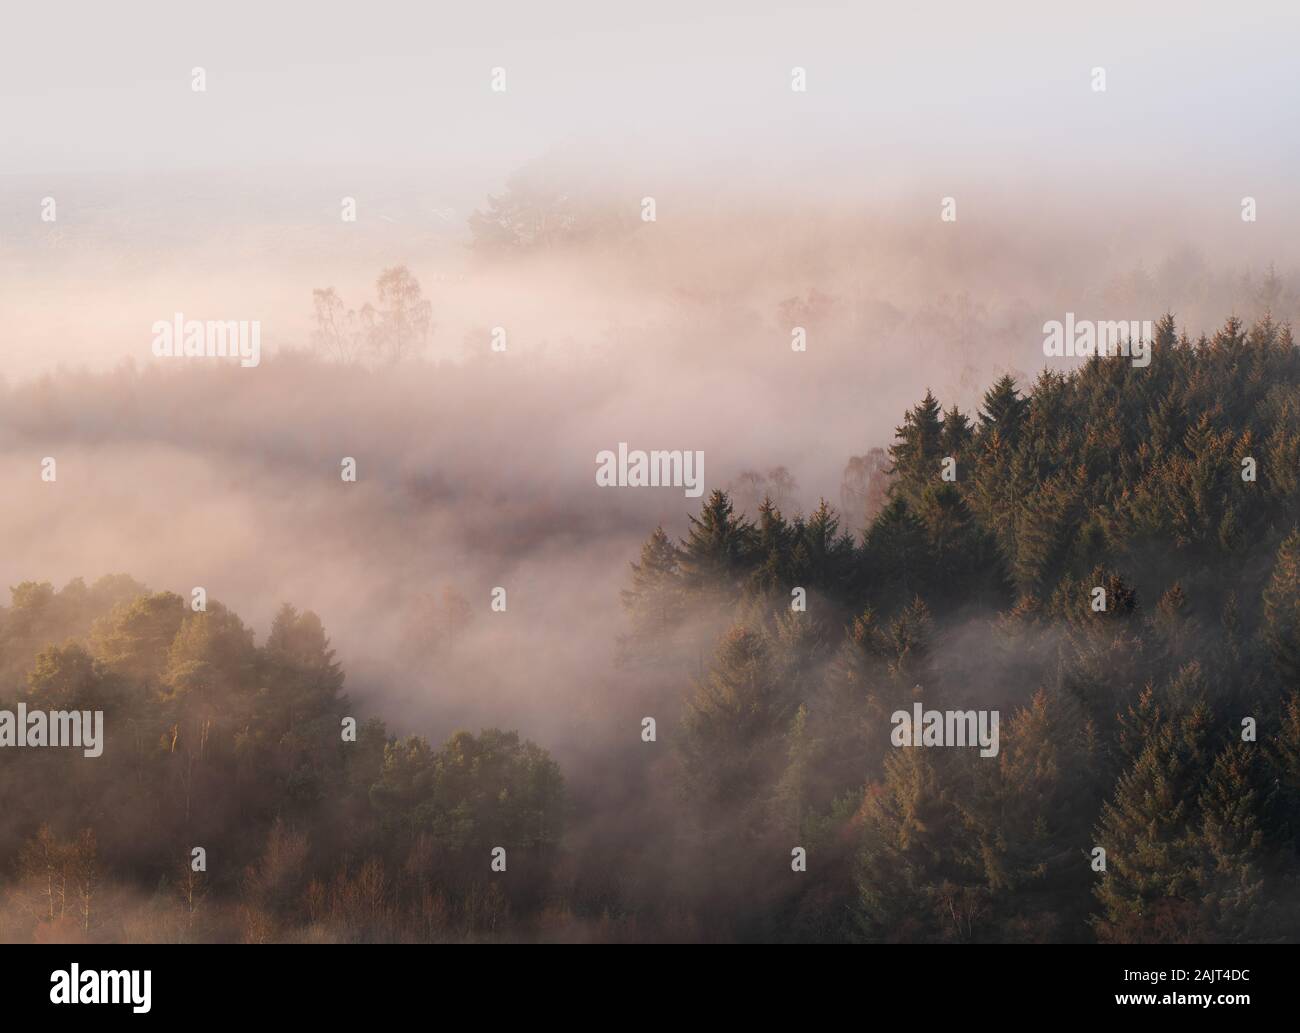 Layers of mist envelop a mixed pine and silver birch forest at sunrise, Portmoak Moss, Kinross-shire, Scotland, UK. Stock Photo